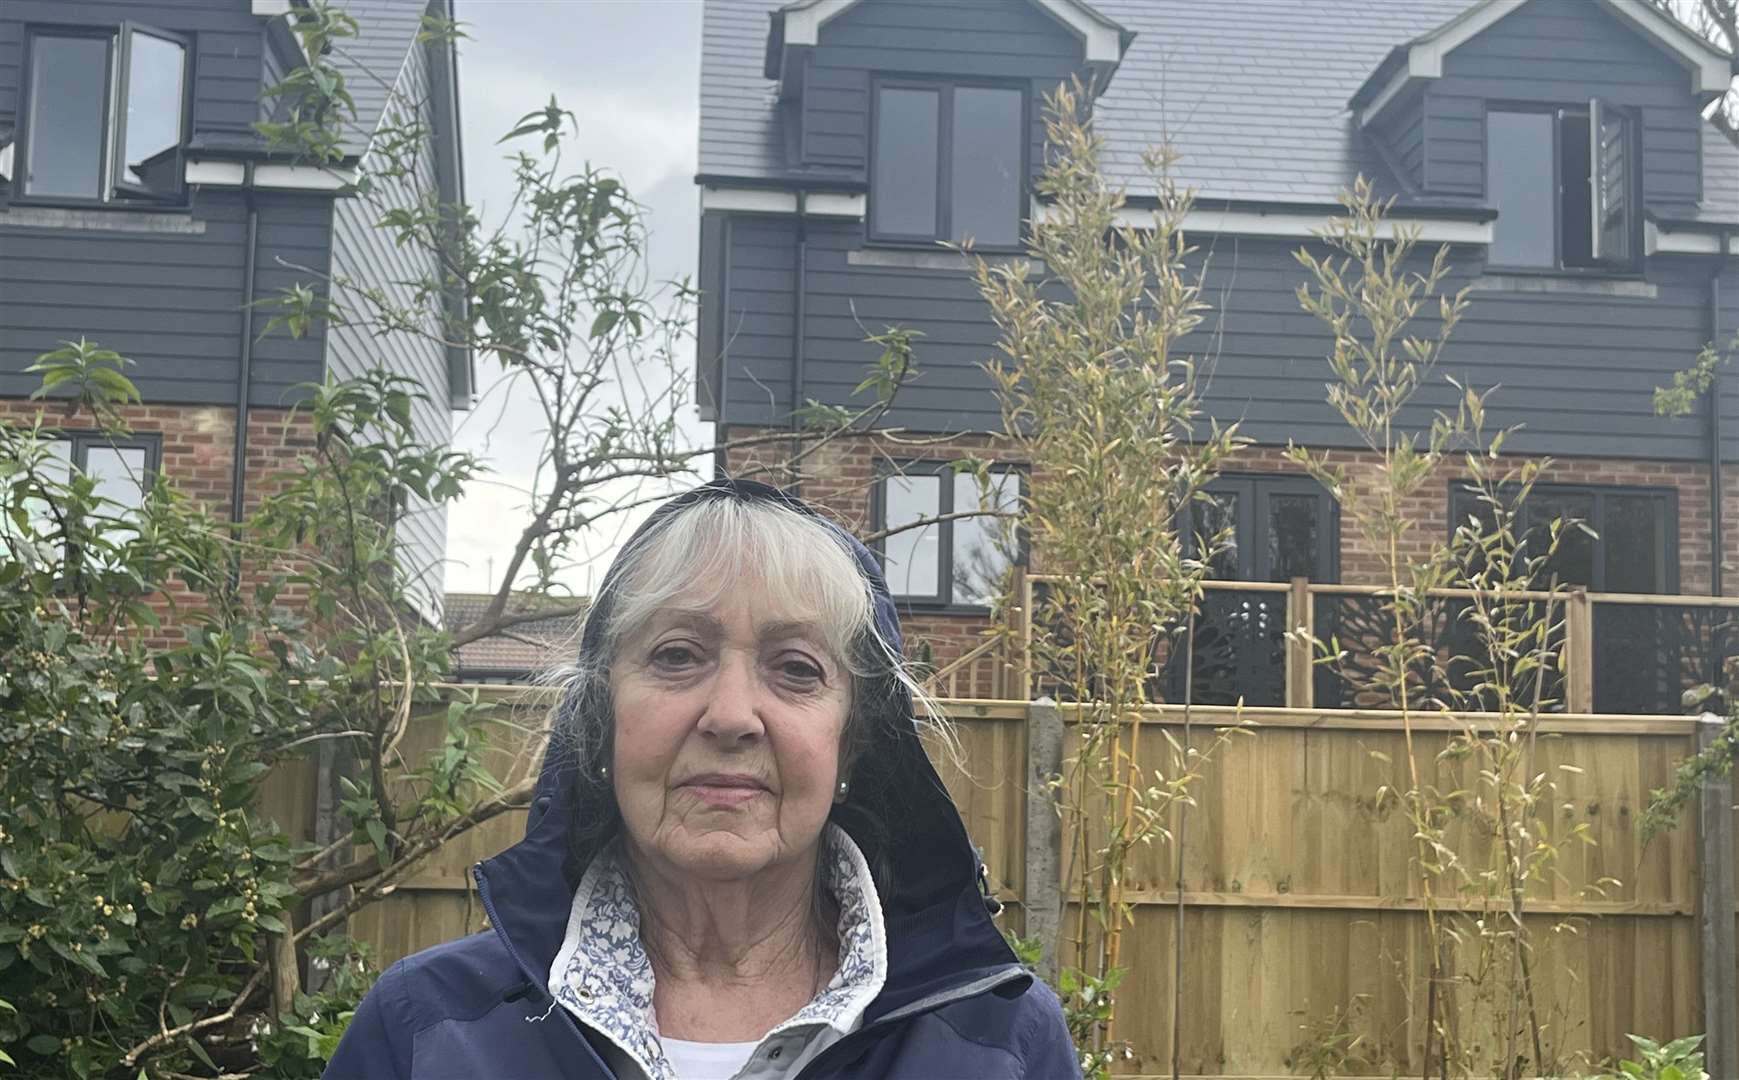 Maureen Field, 80, has lived in Hythe Road for more than 60 years and feels let down that the new development was approved by the Planning Inspectorate